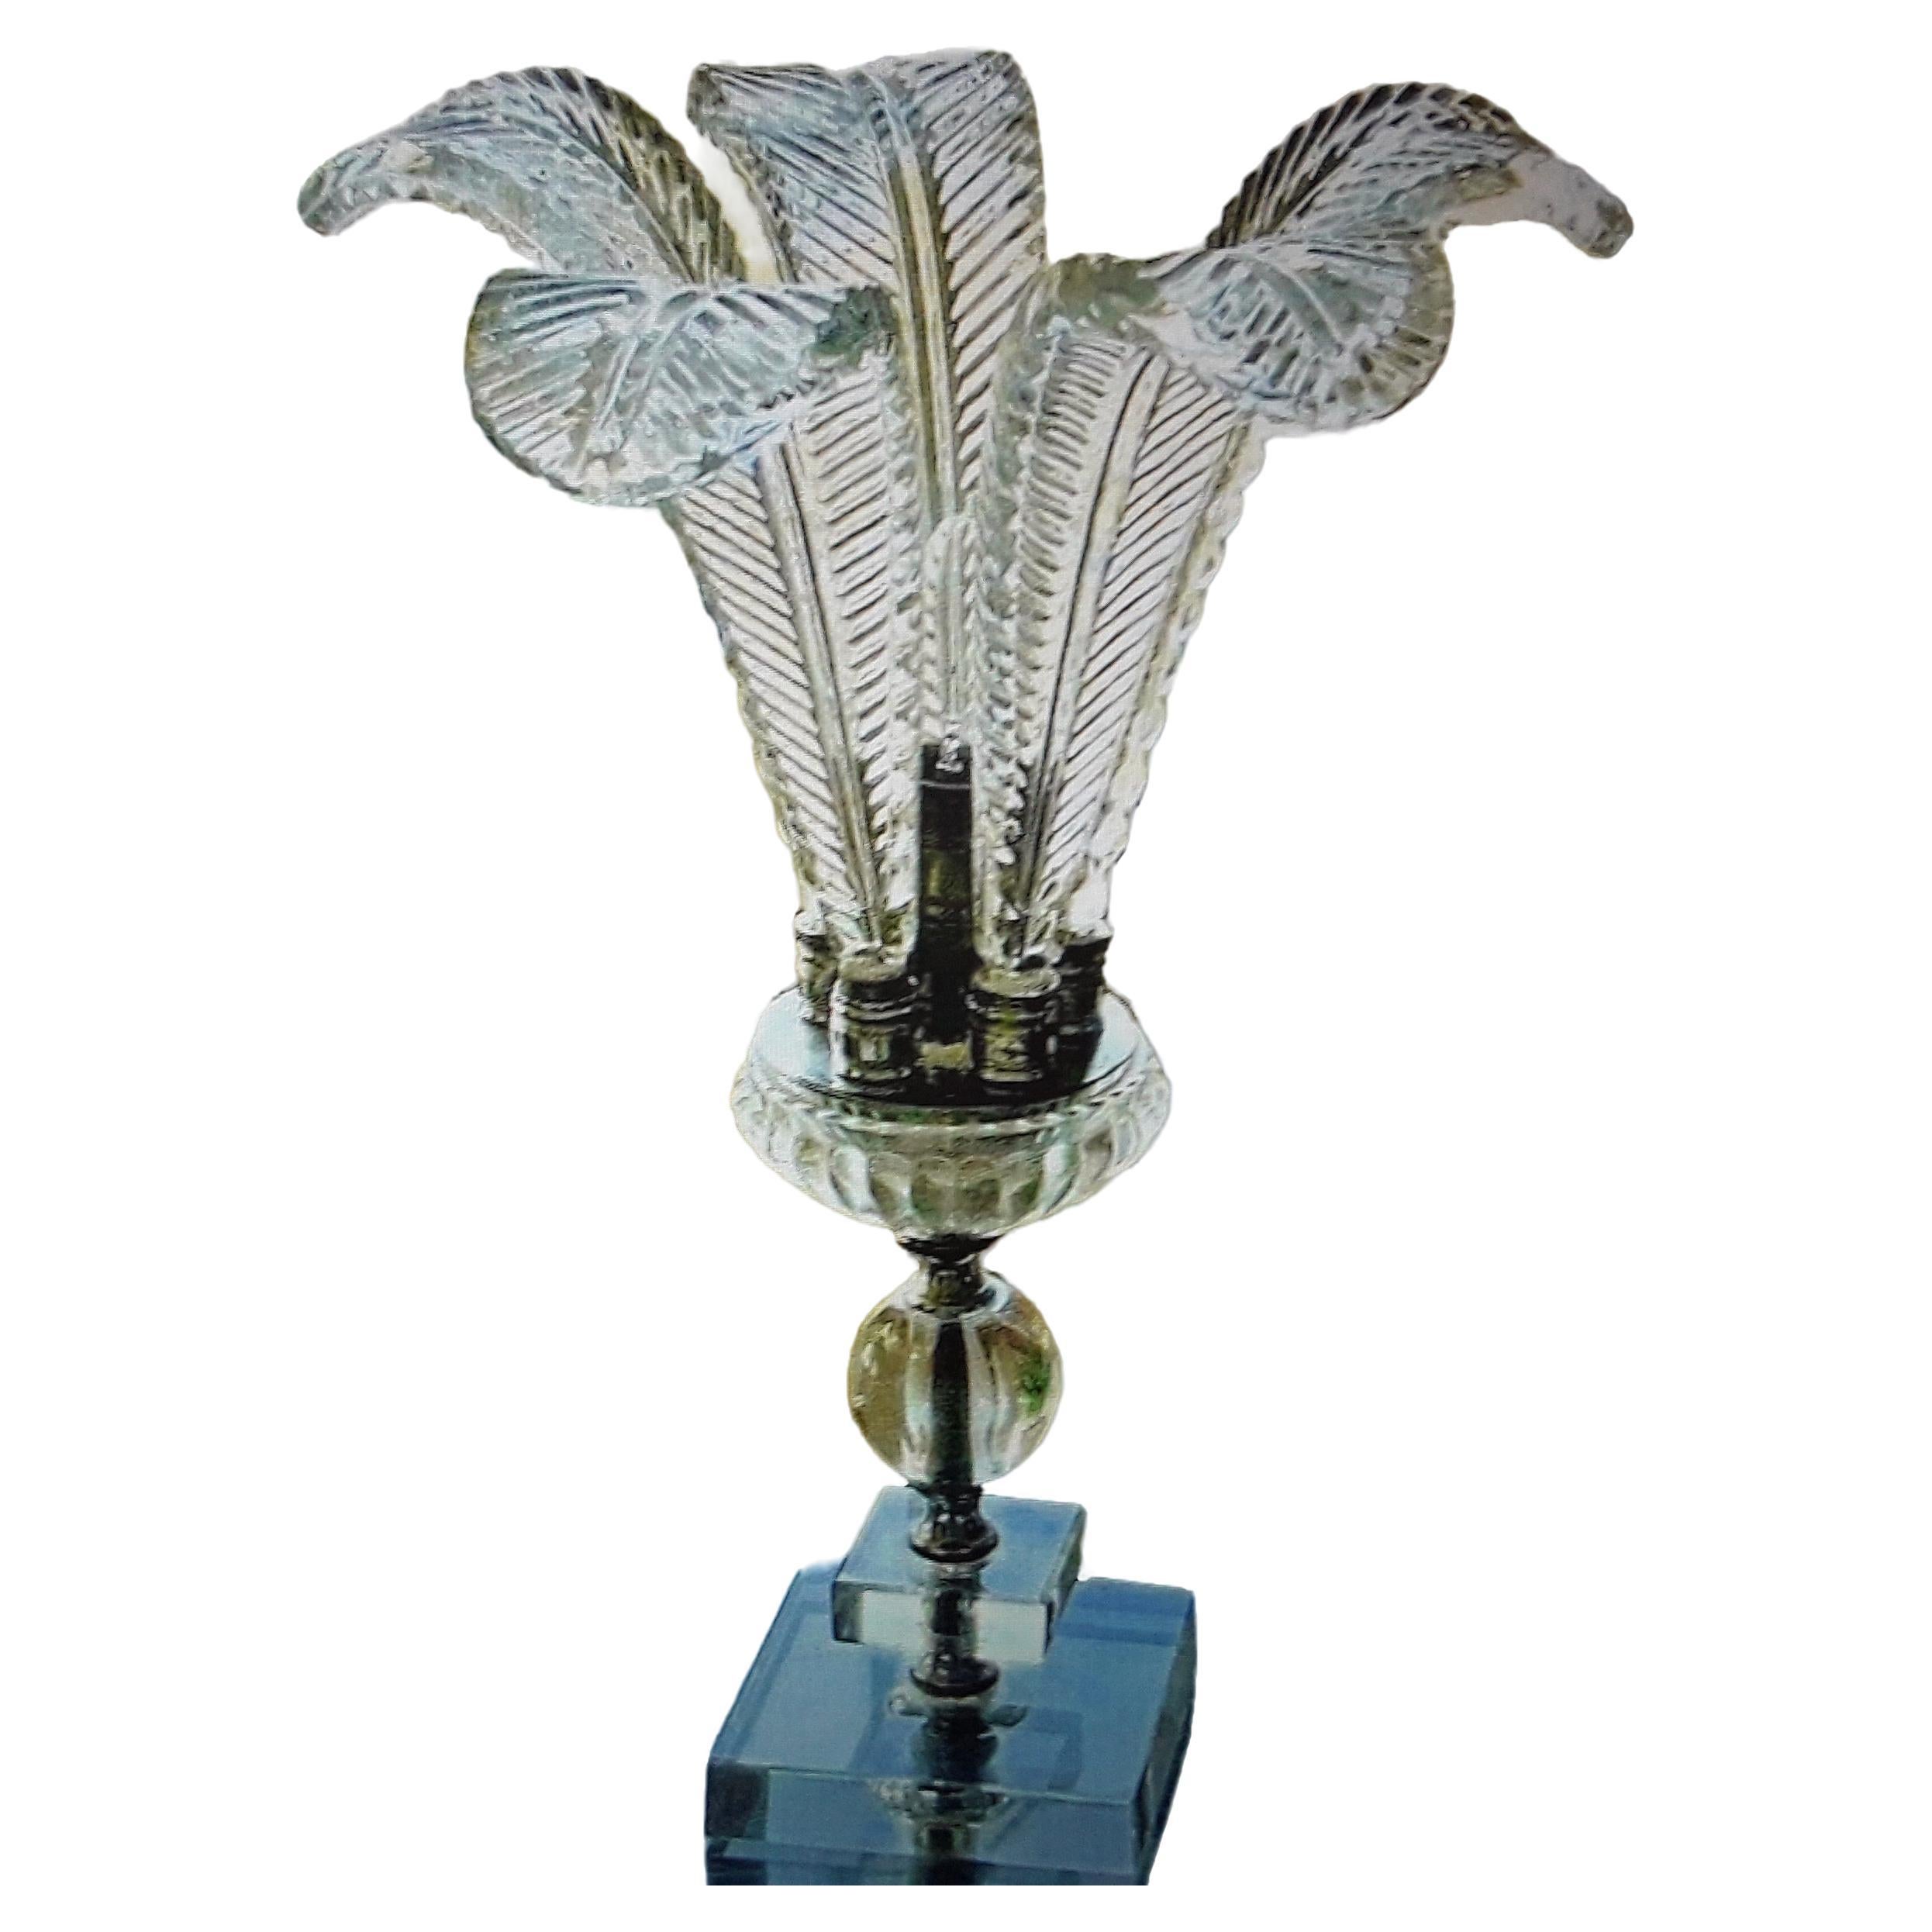 1940's Hollywood Regency Crystal Plume Feather Table Lamp. Beautiful collectable